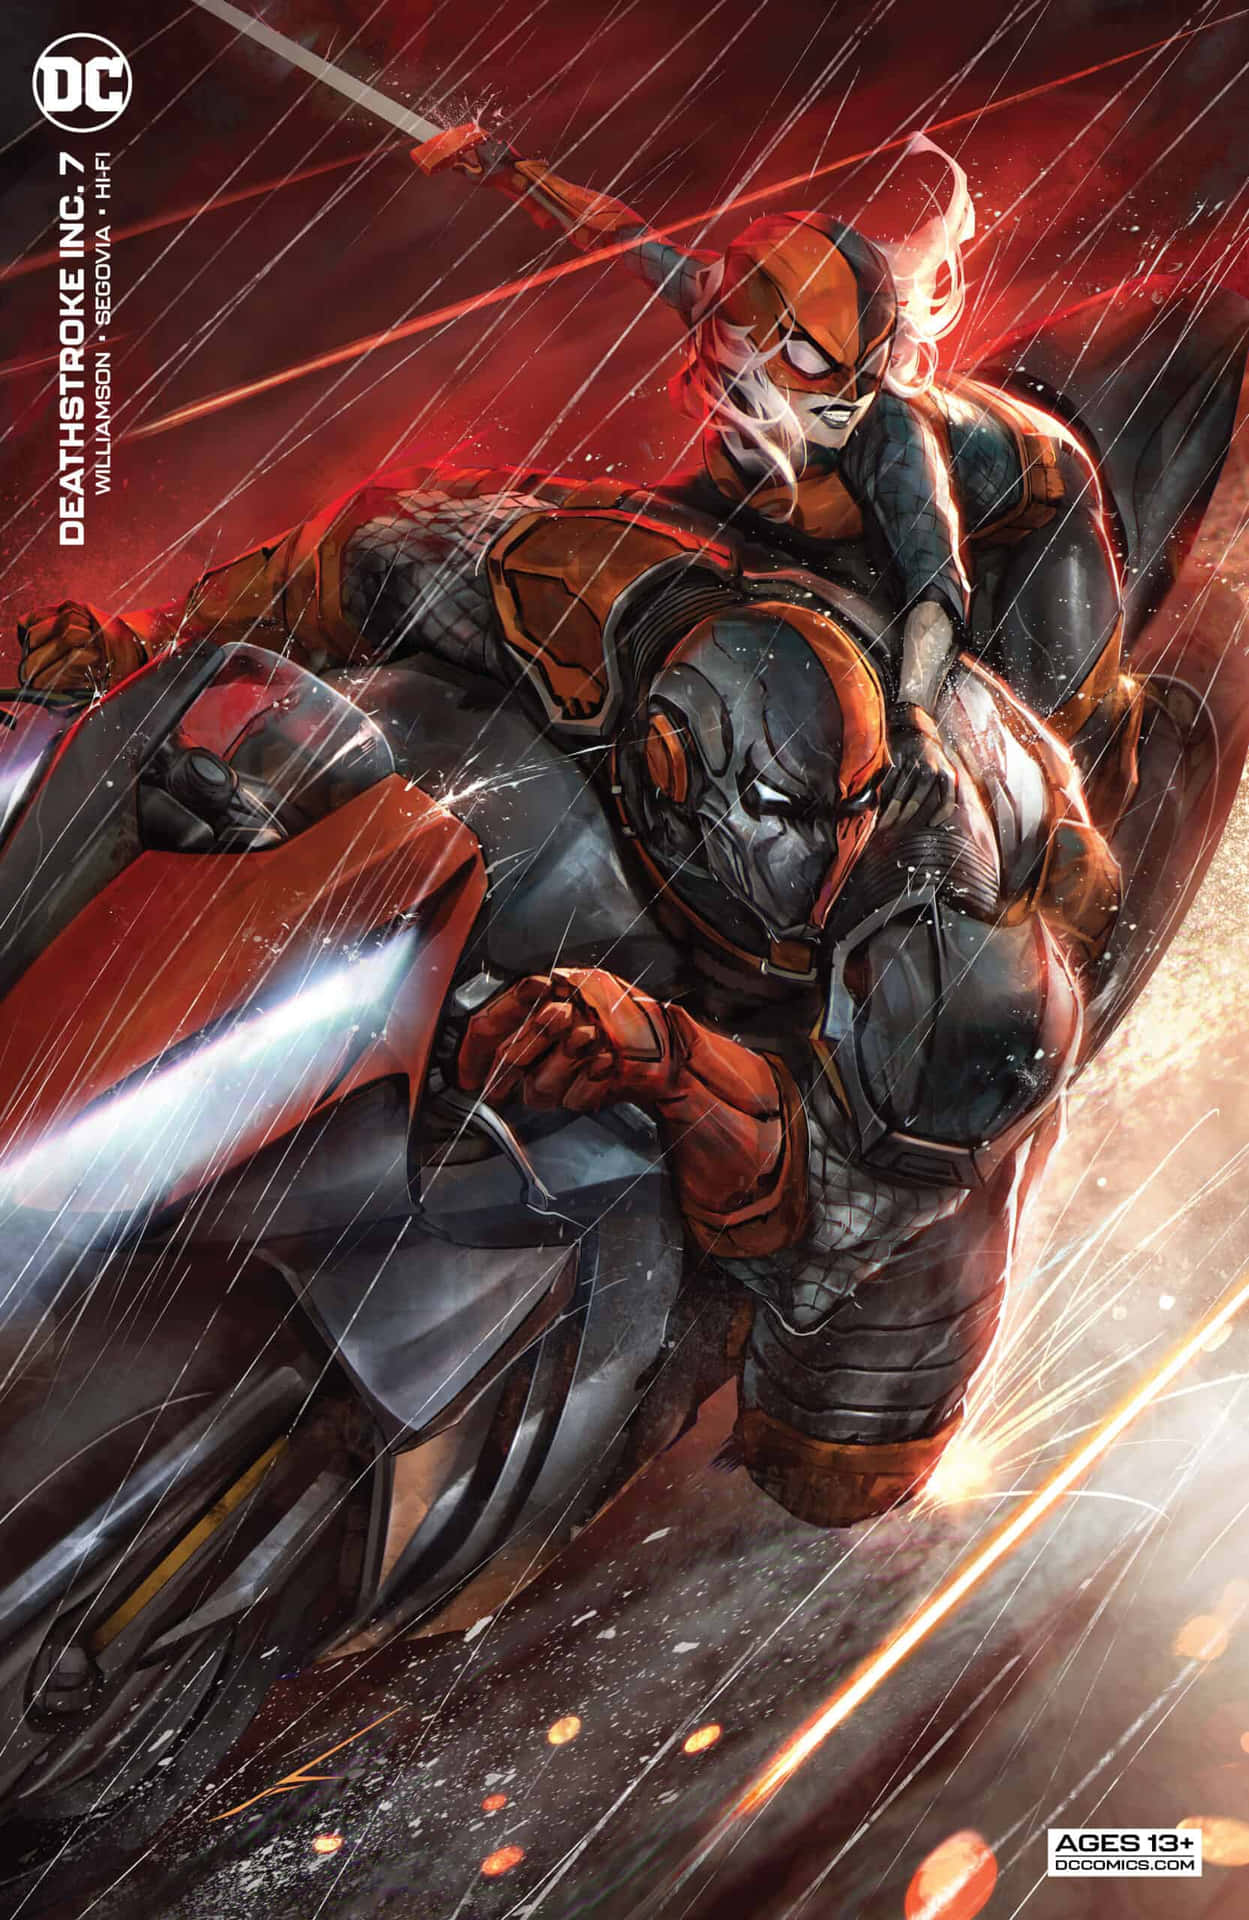 Deathstroke performs a swift and deadly assault against his enemies.